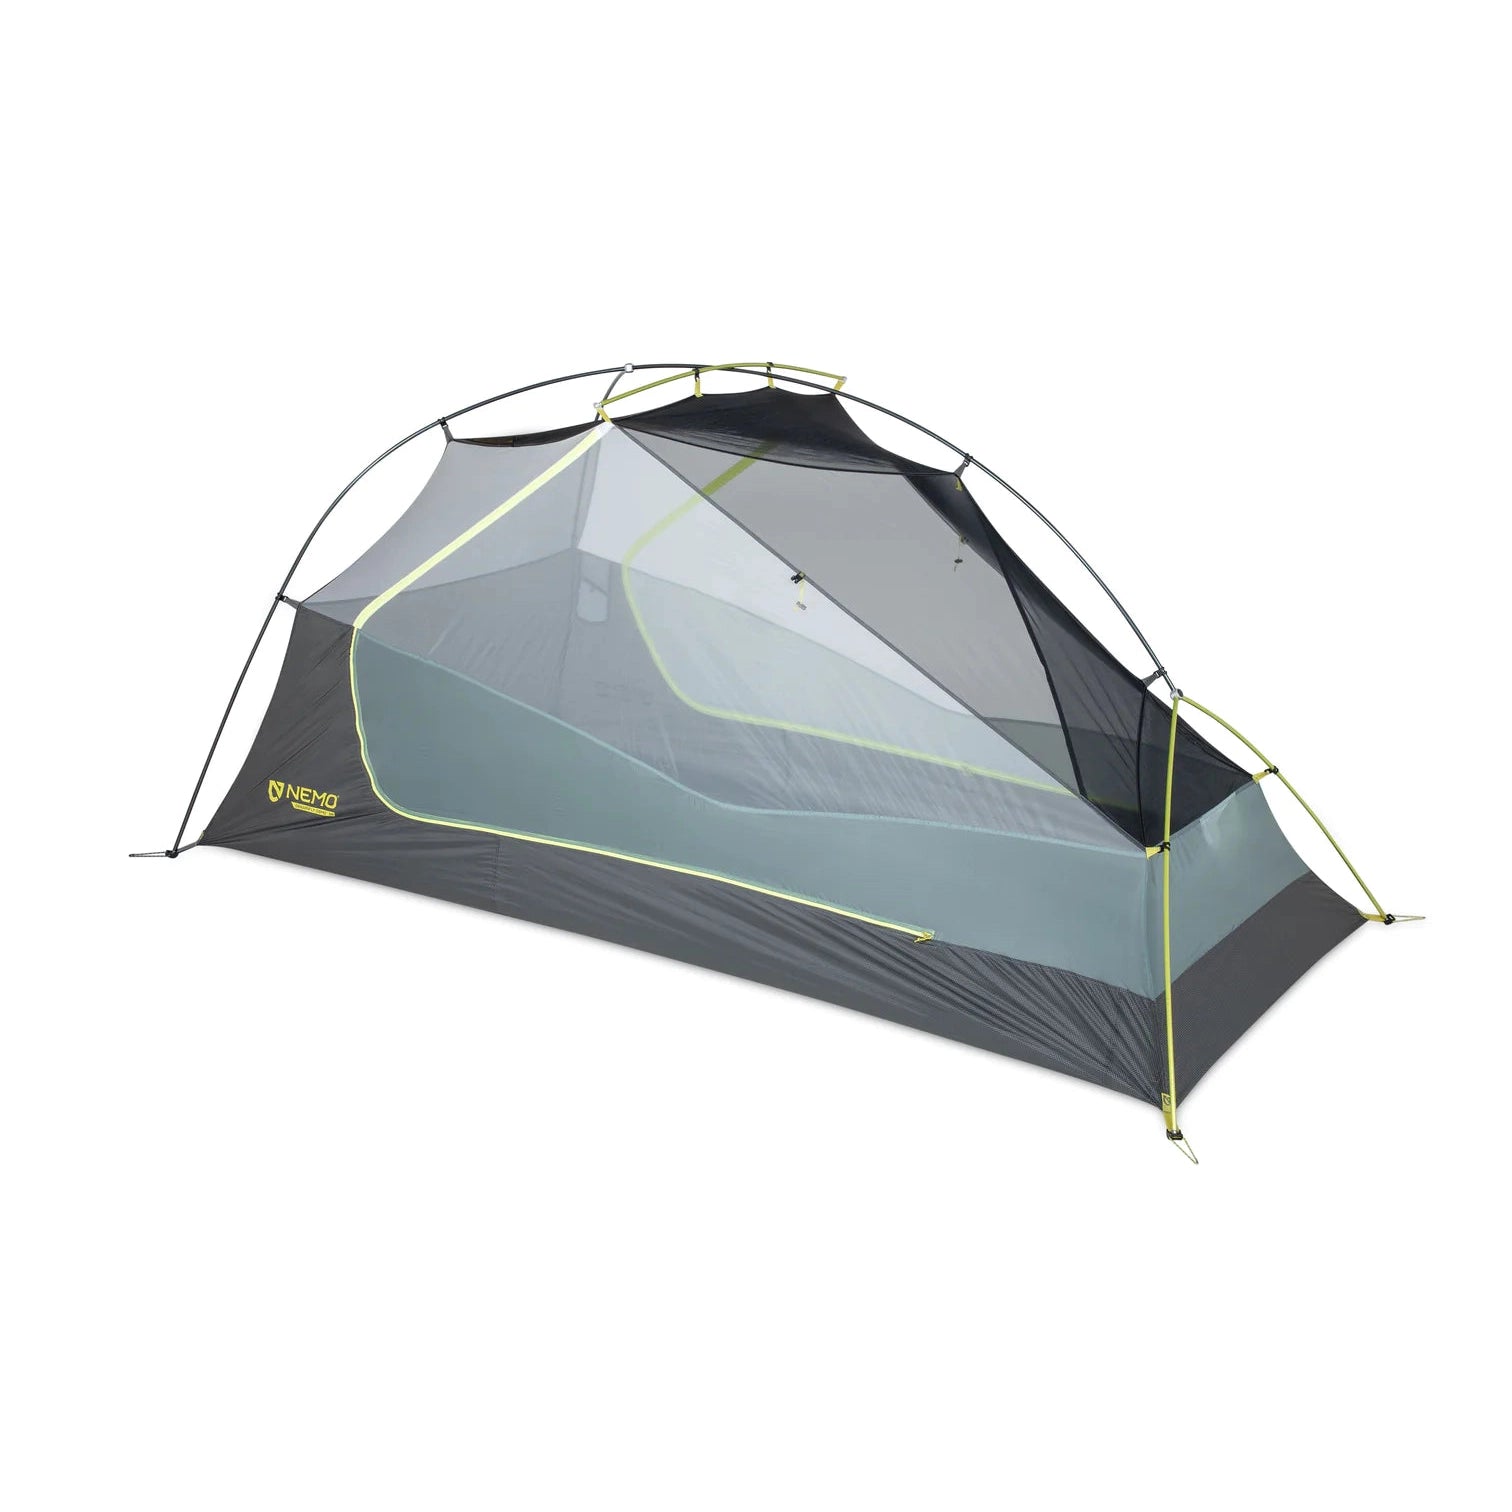 NEMO Dragonfly OSMO Ultralight Backpacking Tent 2 Person